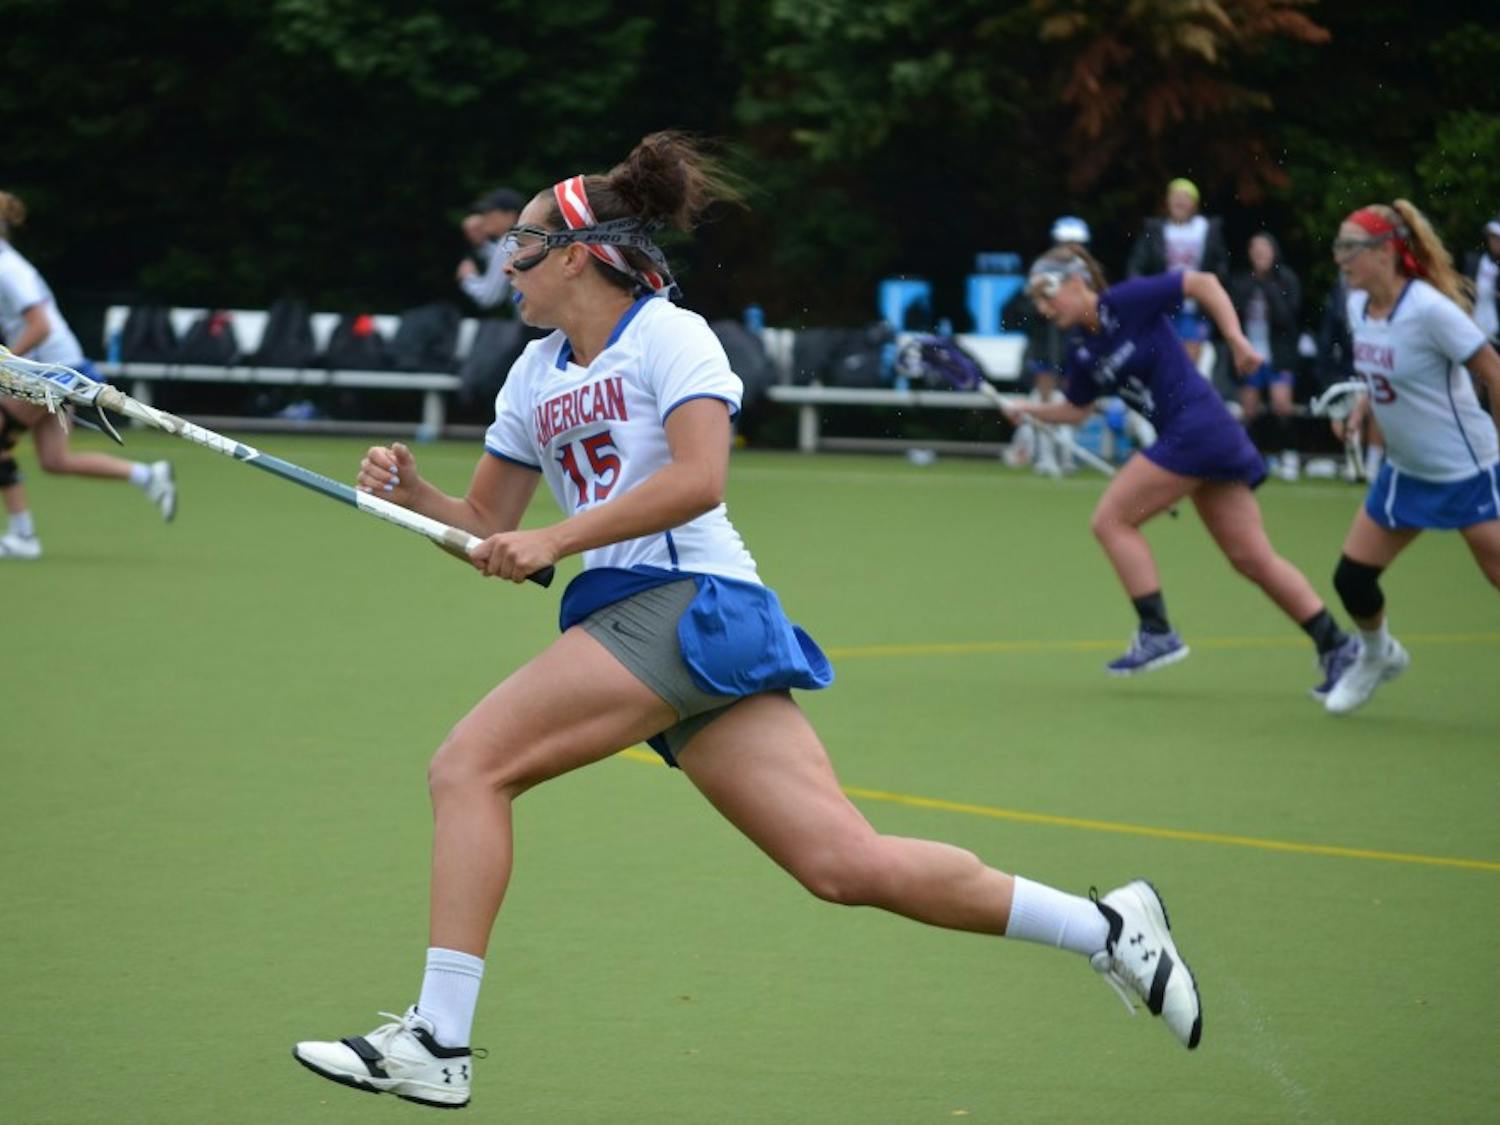 Junior midfielder Lexi Perez carries the ball on offense in the Eagles' 12-10 loss to Holy Cross Saturday at Jacobs Field.